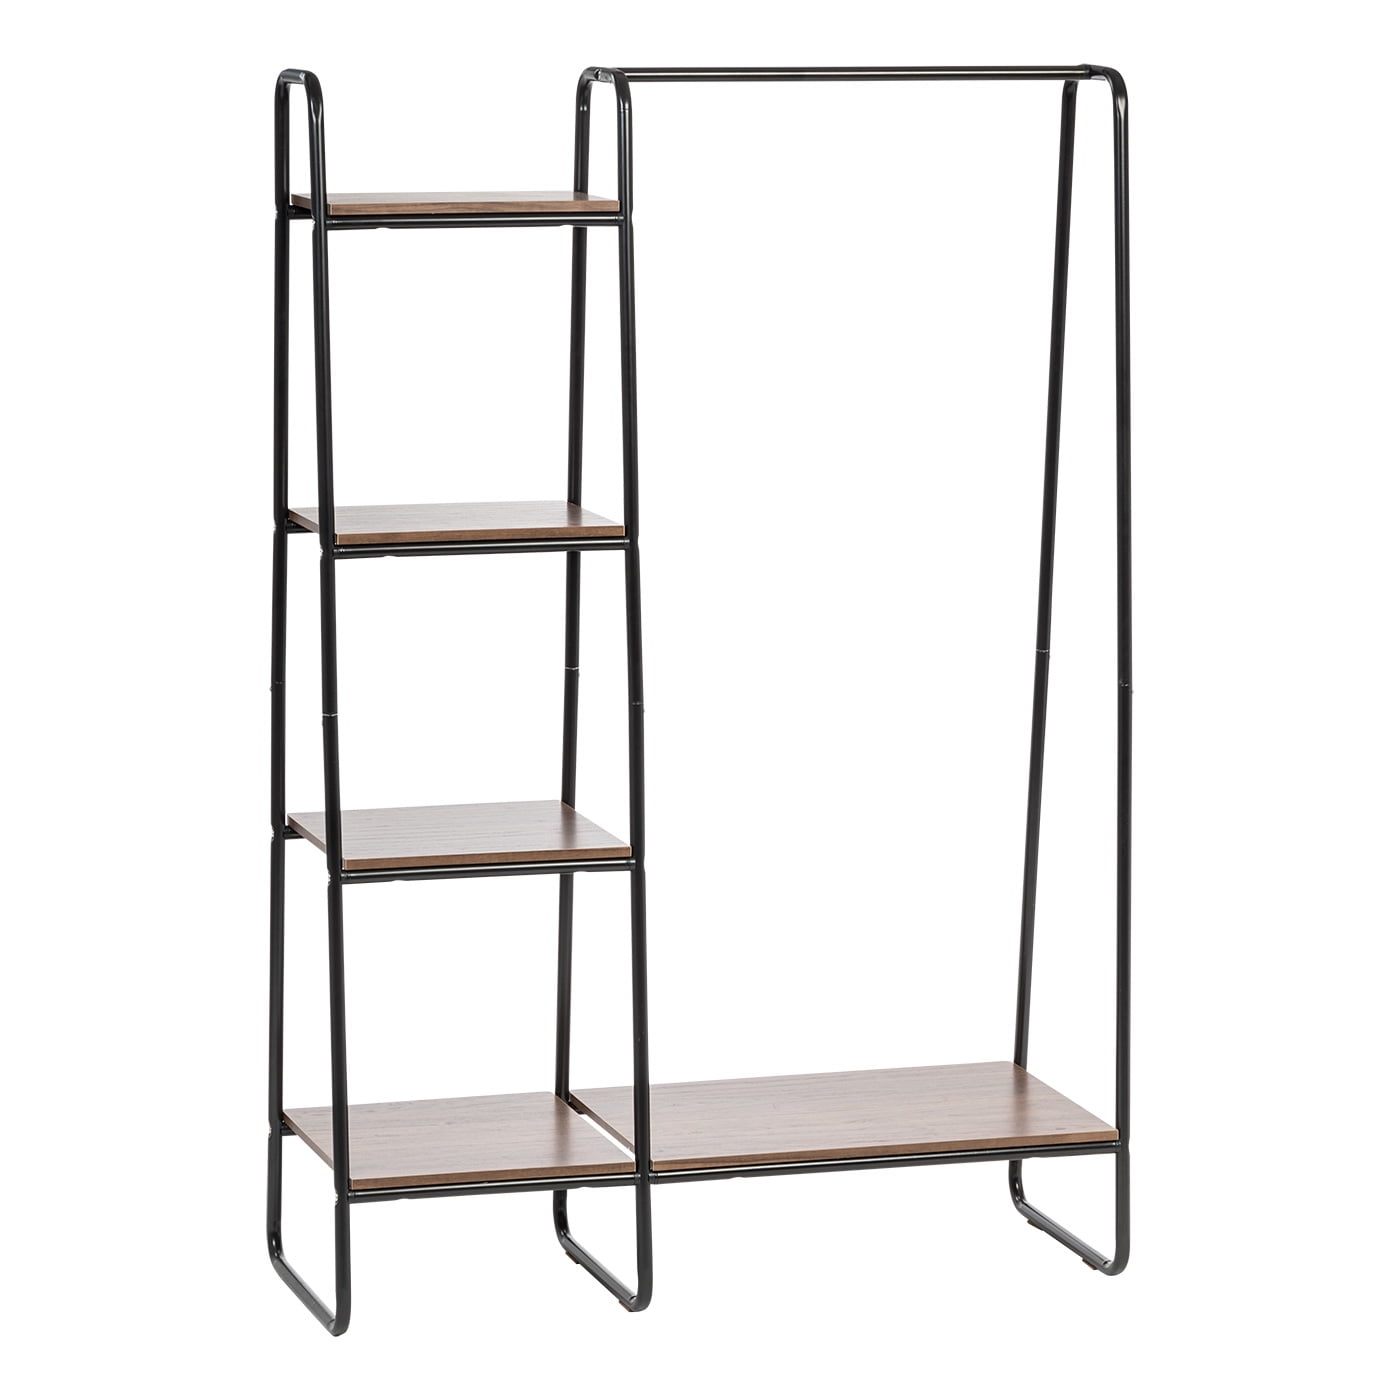 IRIS USA Garment Rack with Wooden Shelves for Hanging Clothes and ...